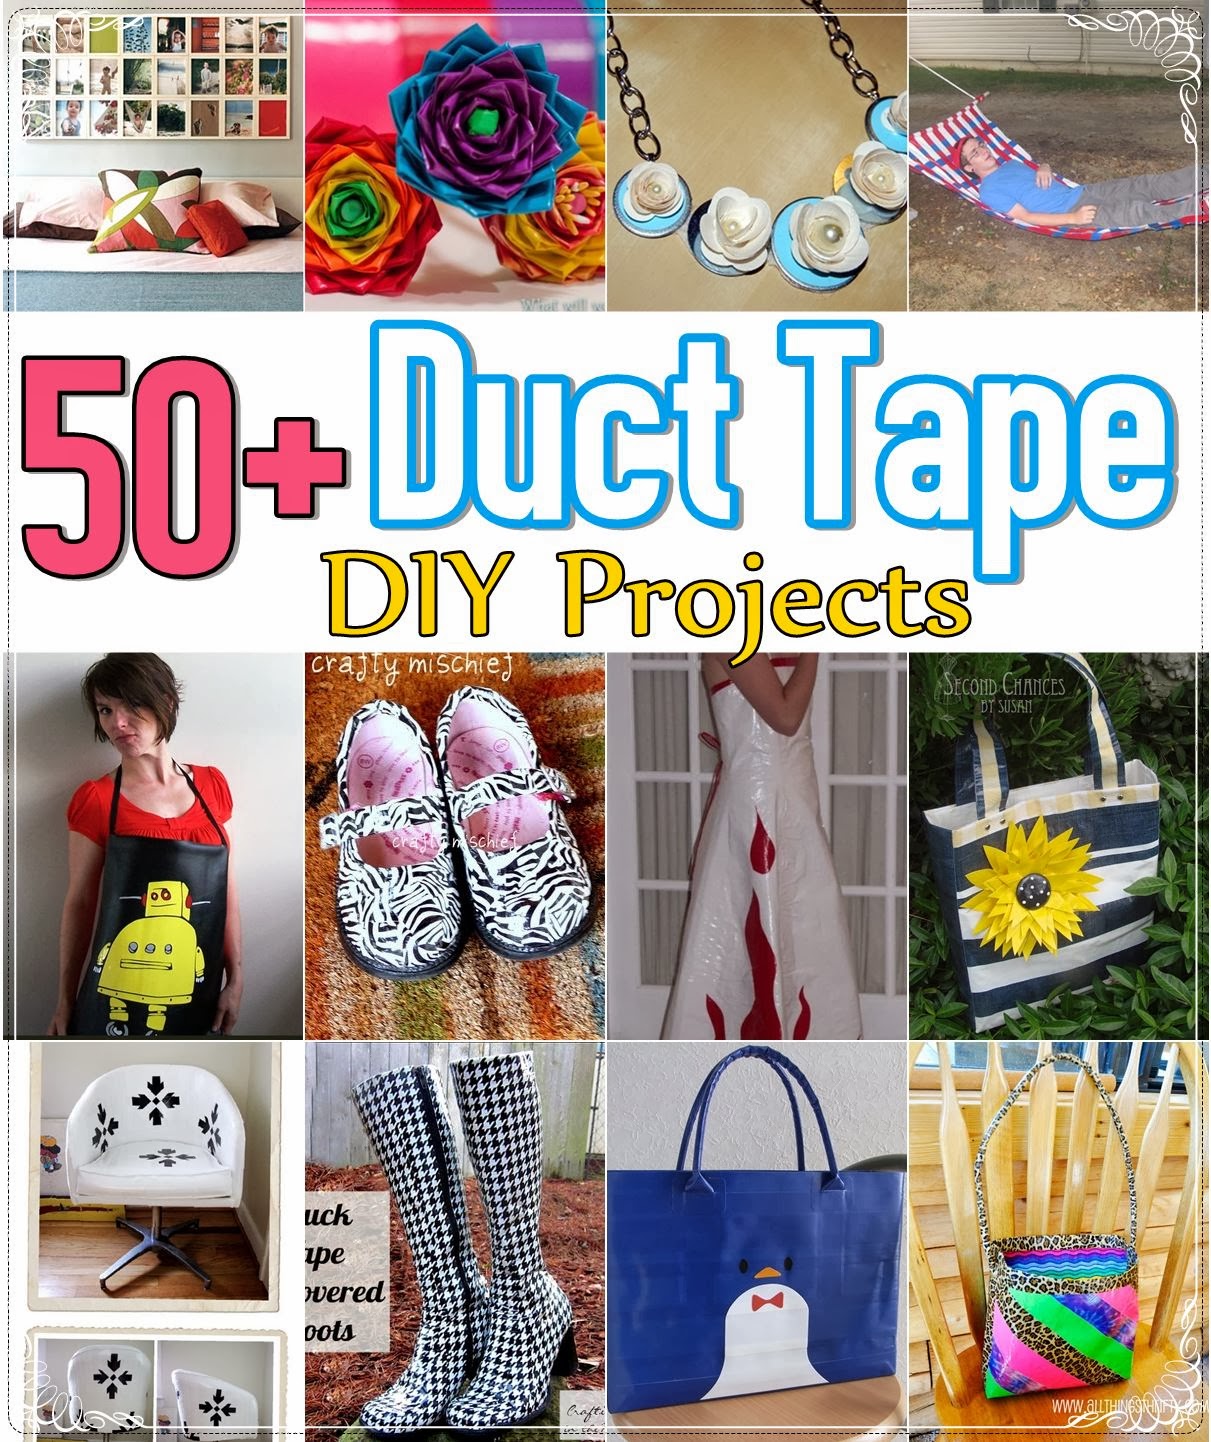 Over 50 Duct Tape DIY Projects